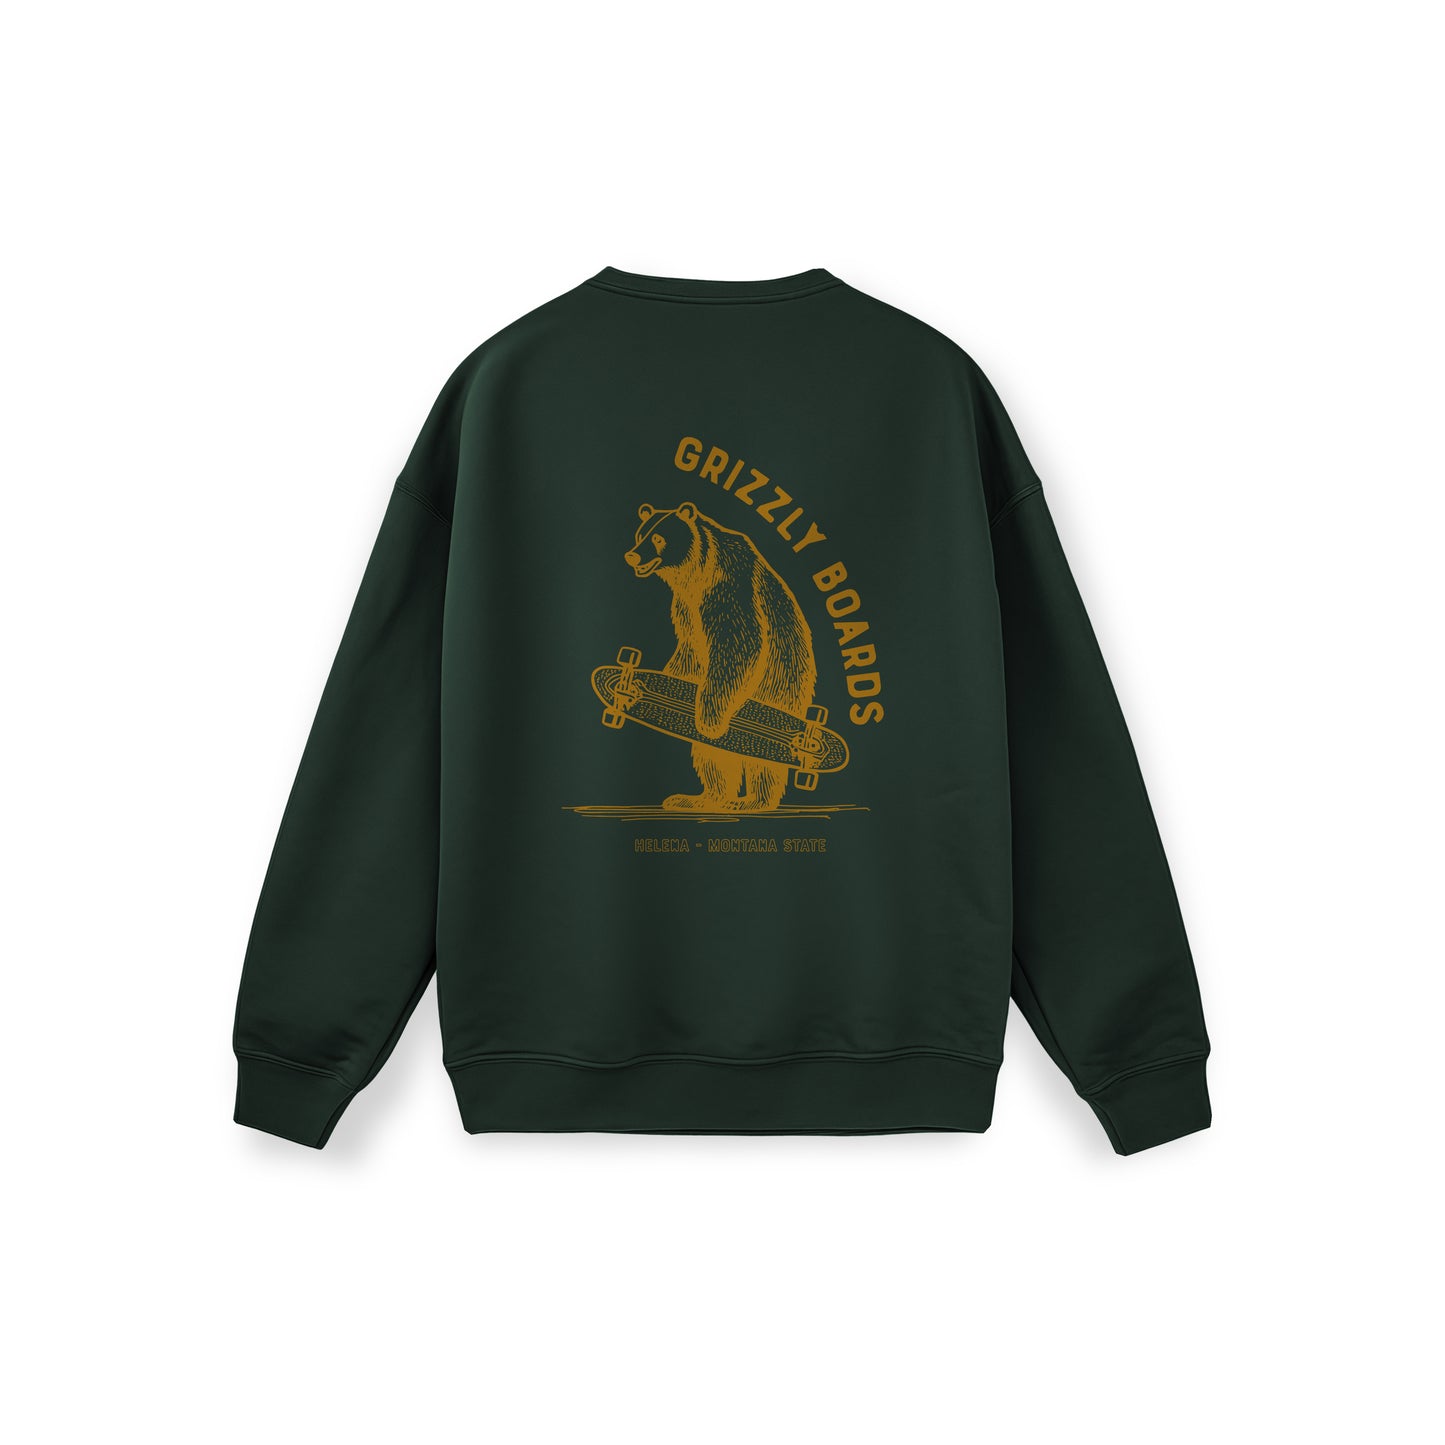 GRIZZLY LONGBOARDS CREW SWEATER